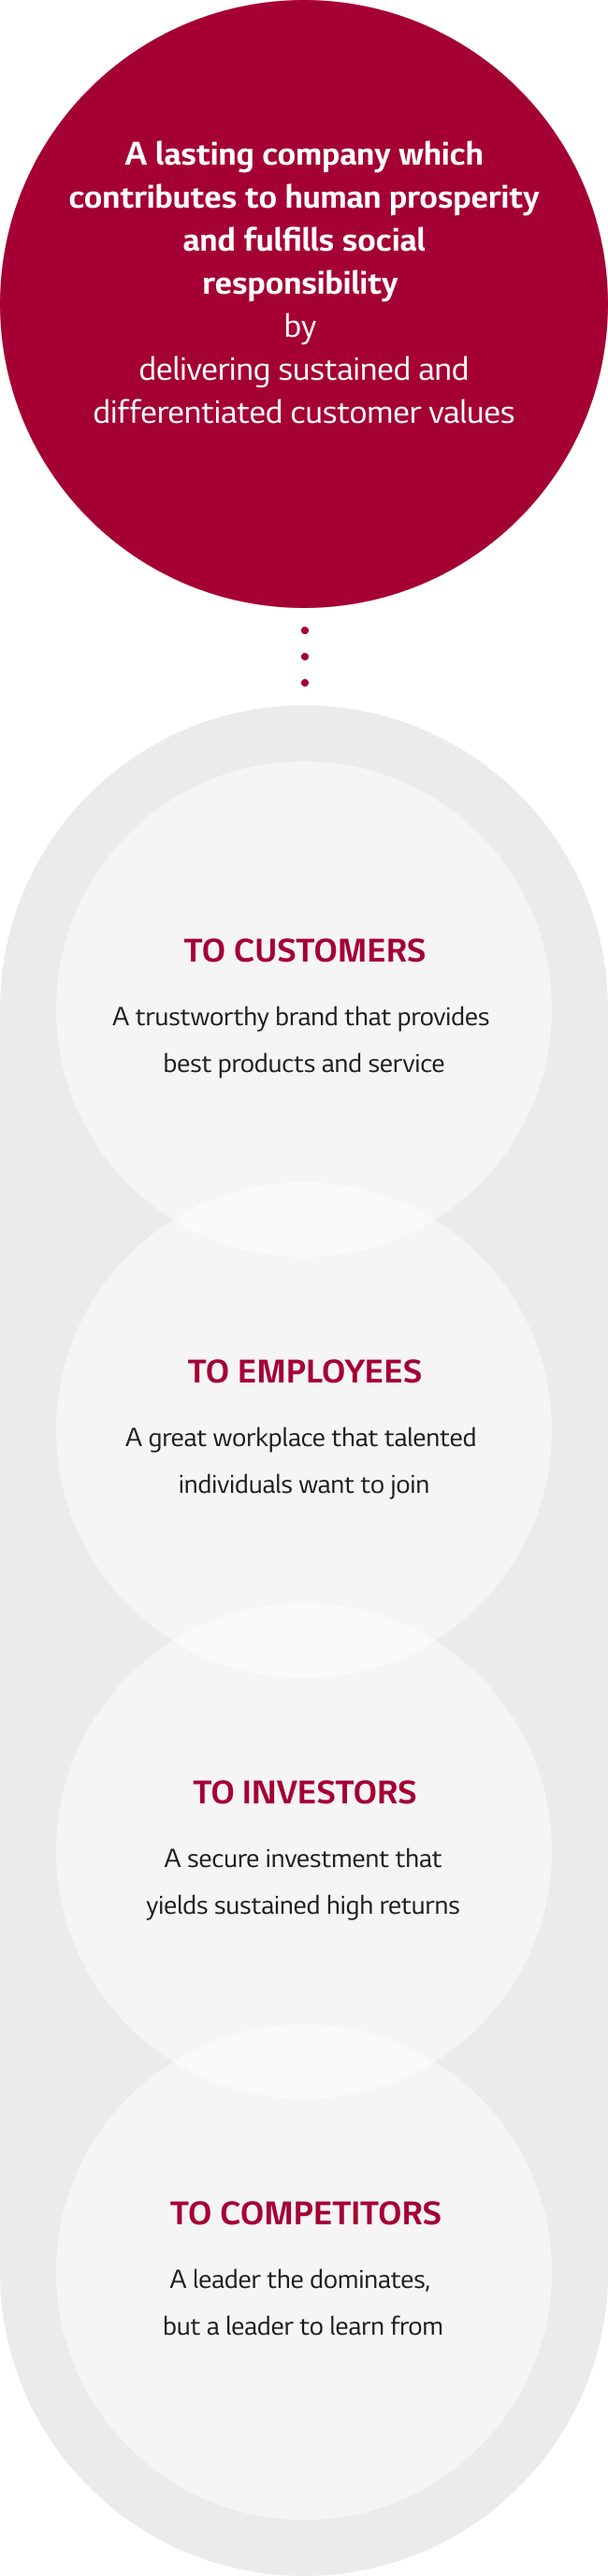 No.1 LG, A lasting company which contributes to human prosperity and fulfills social responsibility by delivering sustained and differentiated customer values